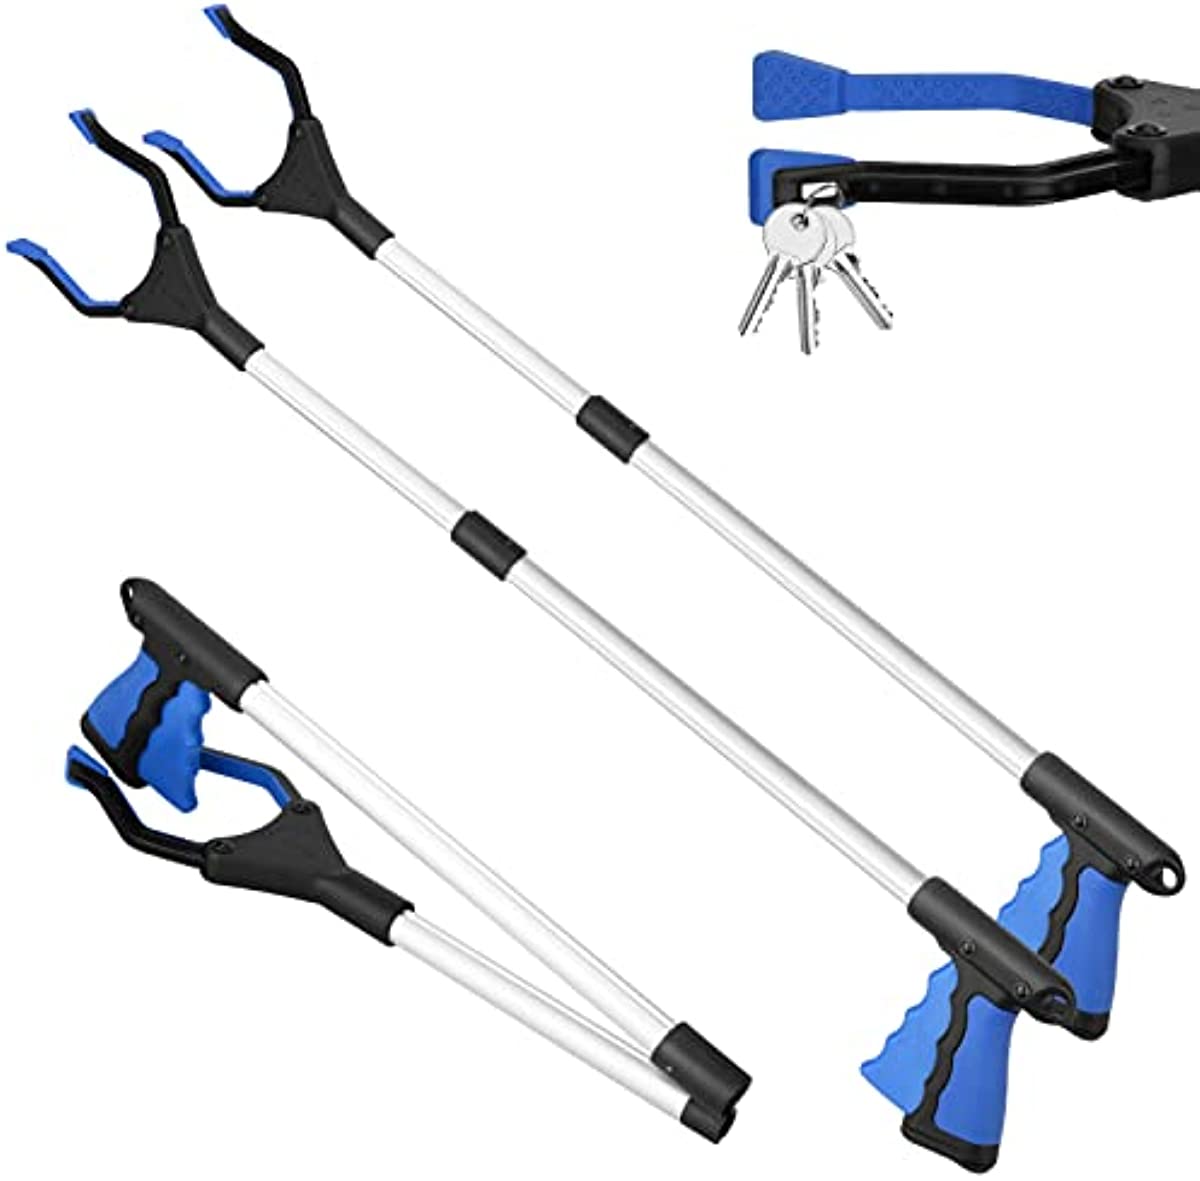 2 Pack 32 Inch Reacher Grabber Tool with 360° Anti-Slip Rotating Jaw, Foldable Grabbers for Elderly, Lightweight Trash Claw Grabber with Magnet, Garden Nabber, Mobility Aid Reaching Assist Tool (Blue)